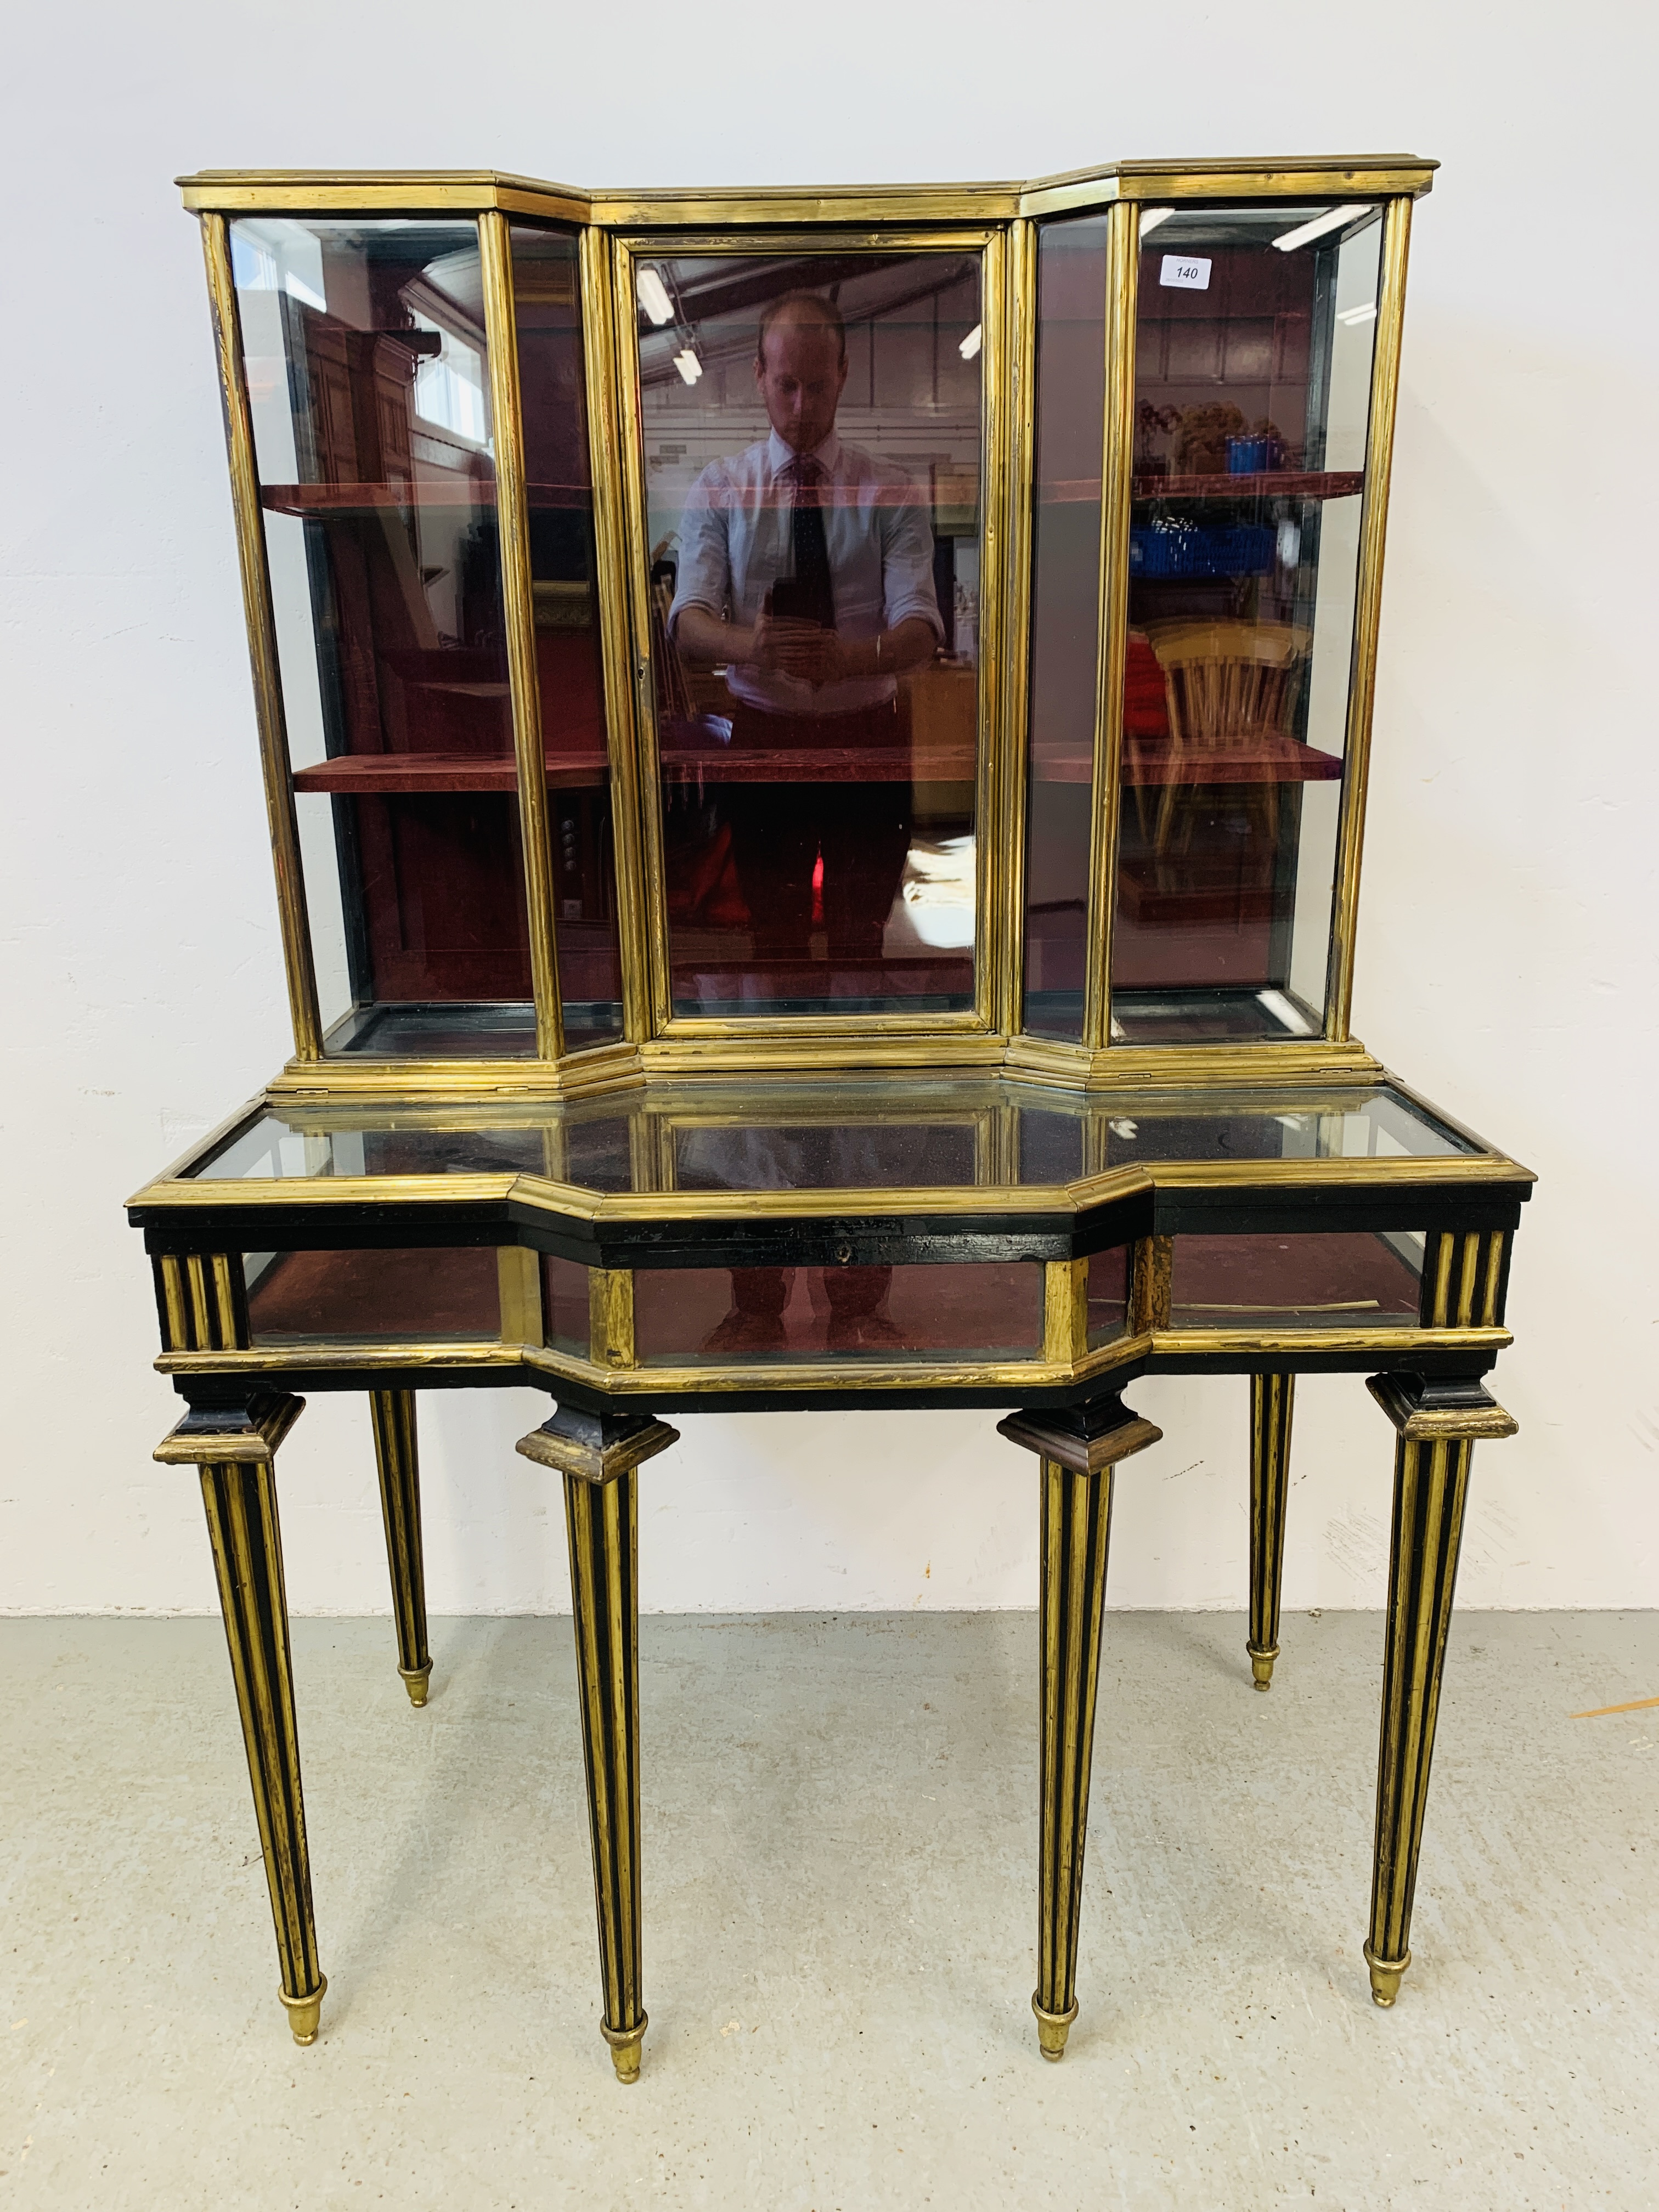 A C19th FRENCH BRASS AND EBONISED CABINET, THE TOP AND SIDES GLAZED,